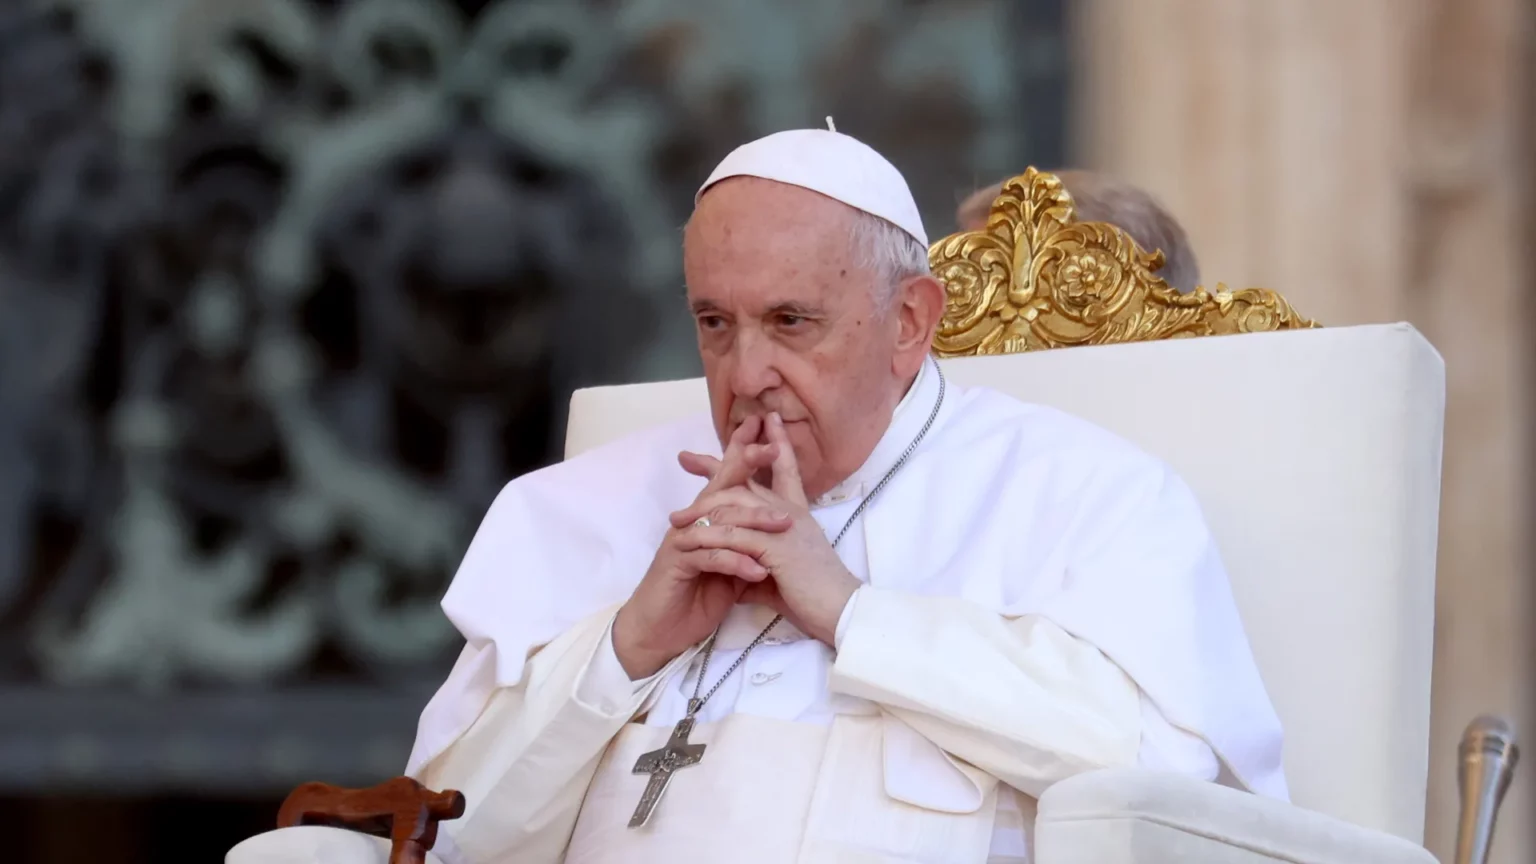 kyiv-accuses-pope-francis-of-spreading-imperial-propaganda-in-a-video-message-to-catholic-russians